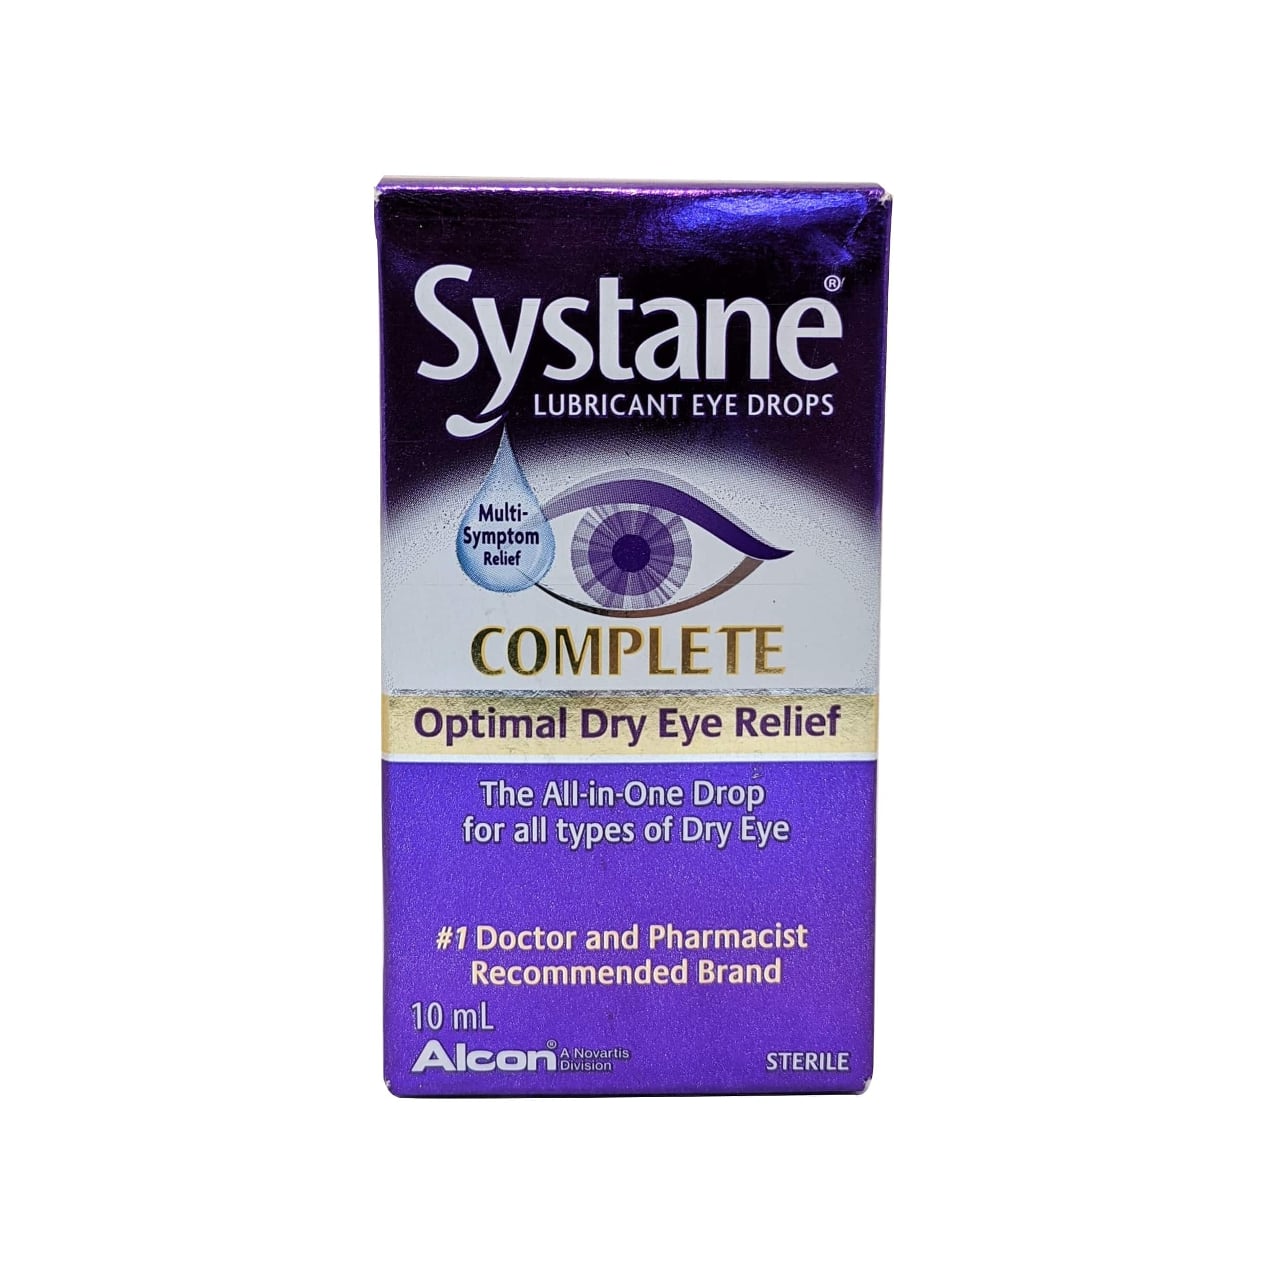 English product label for Alcon Systane Complete Lubricant Eye Drops